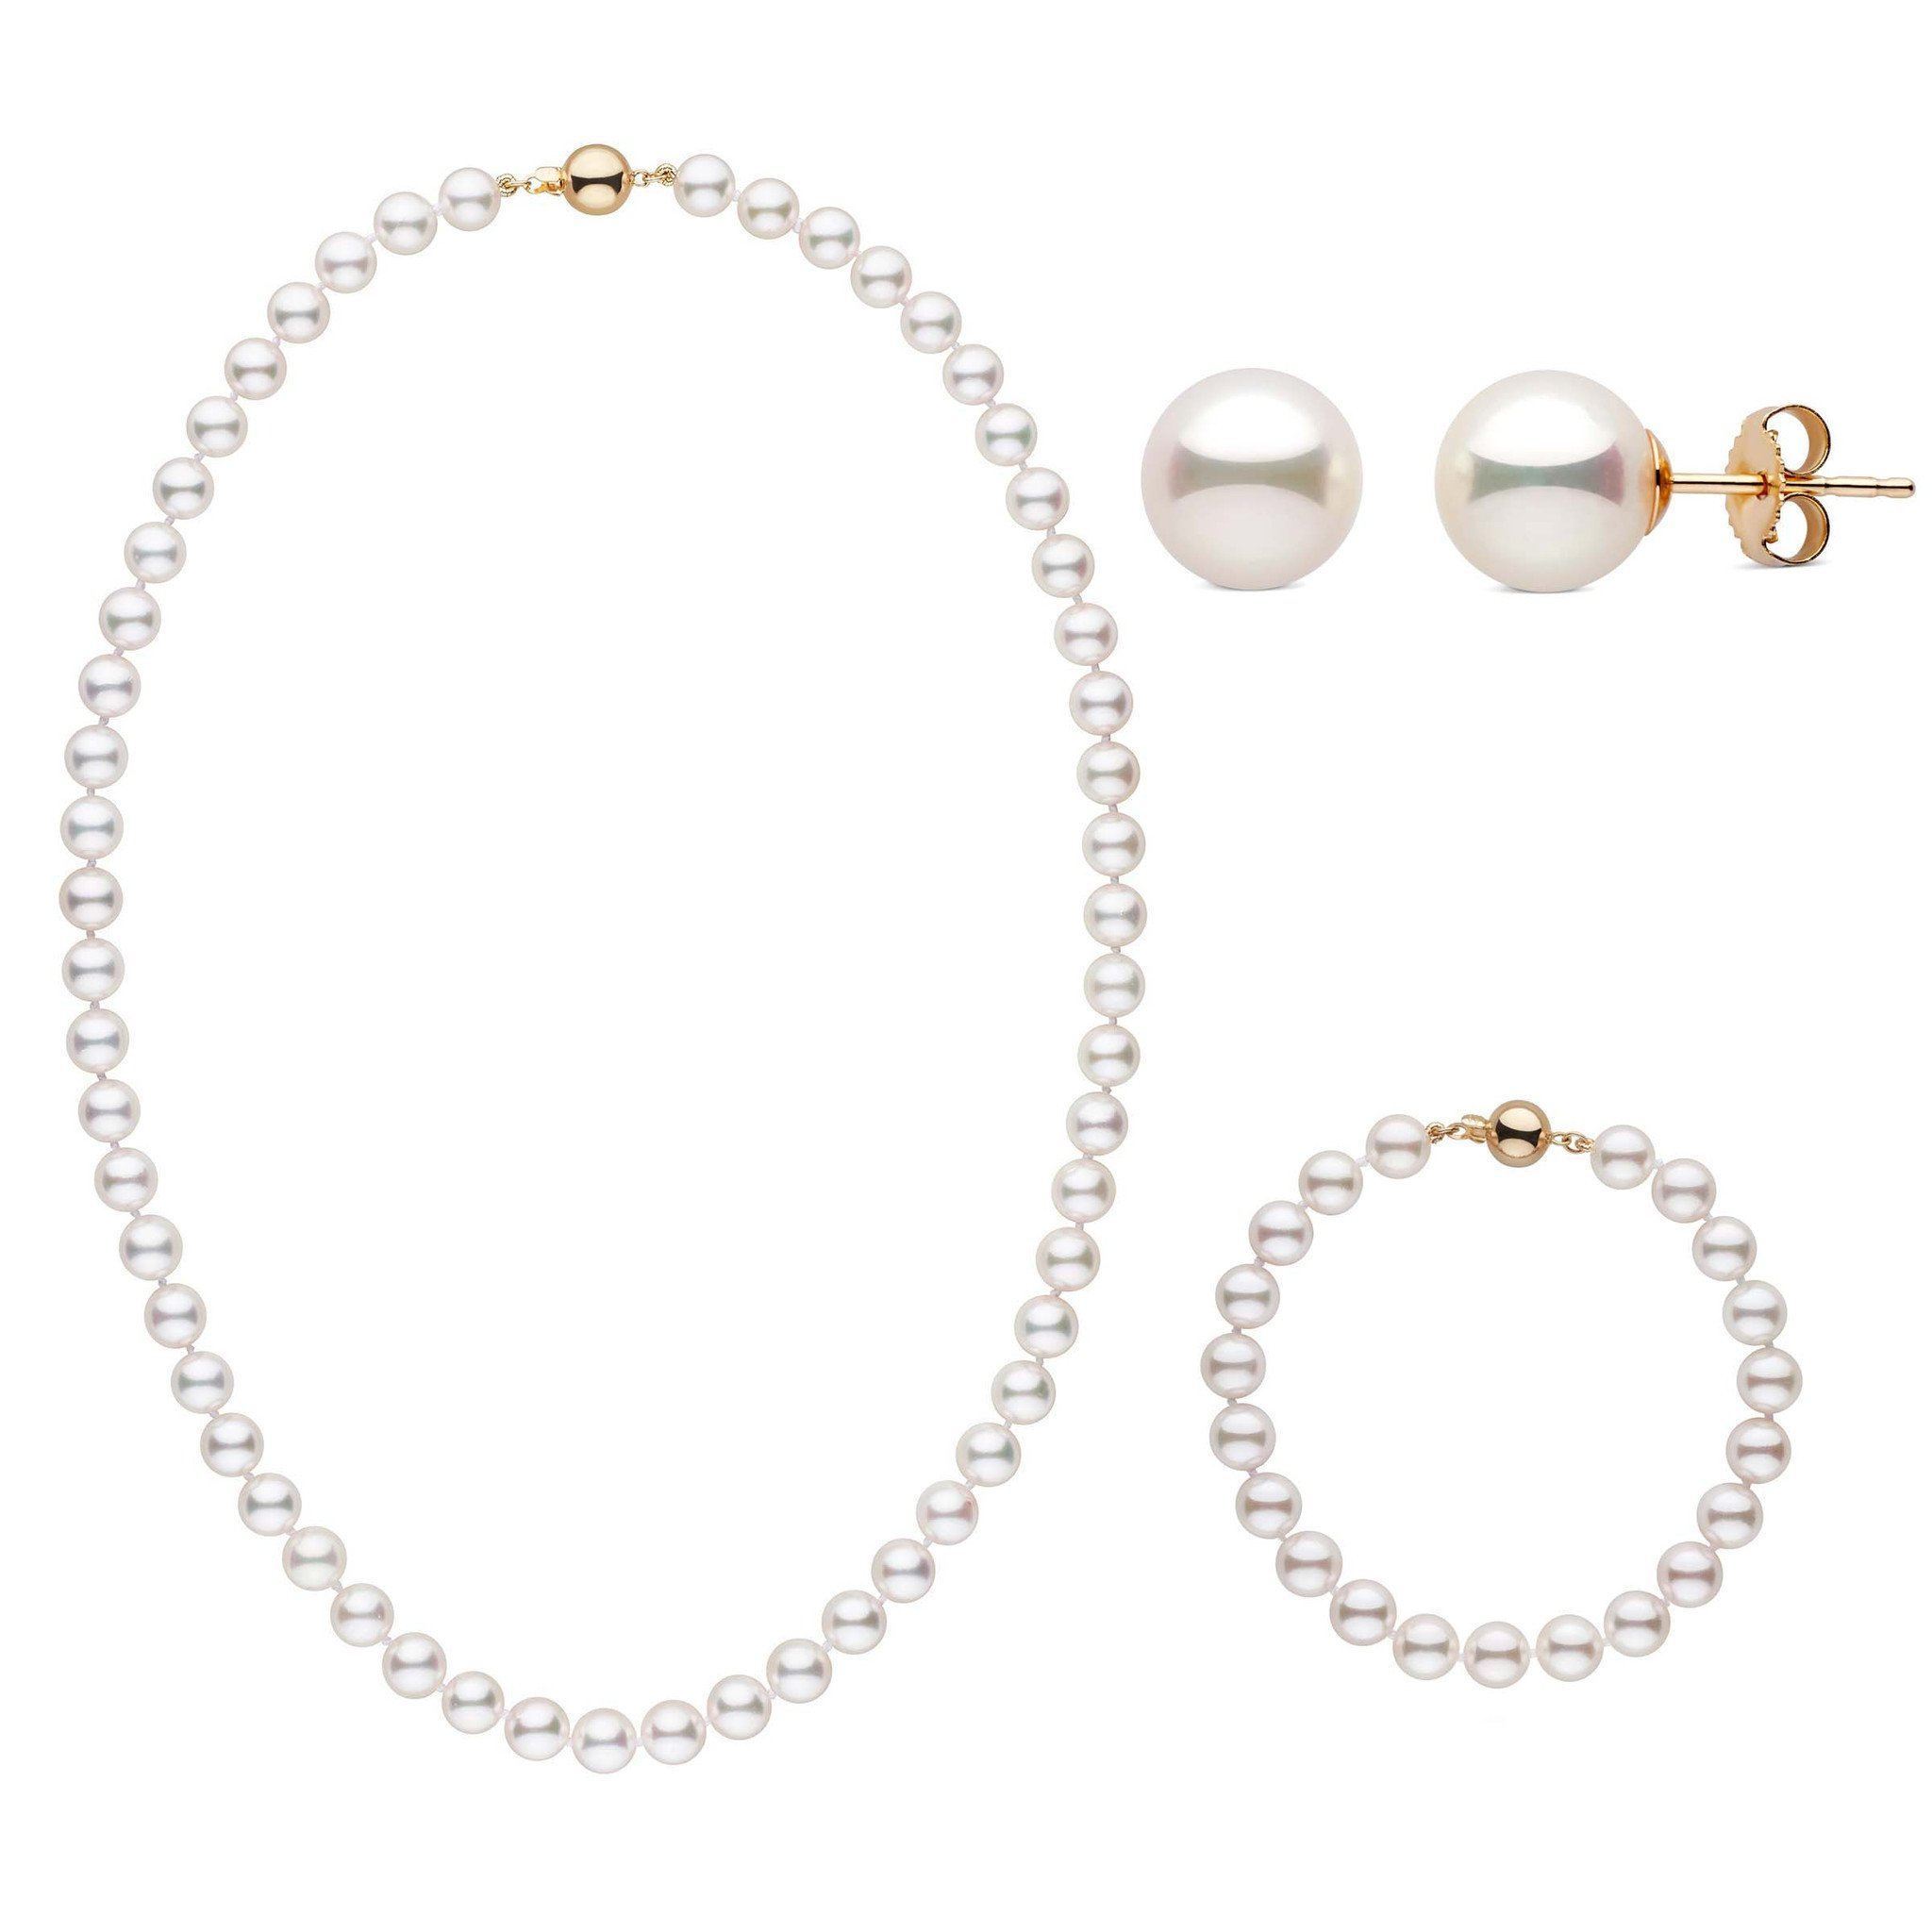 18 Inch 3 Piece Set of 7.5-8.0 mm AAA White Akoya Pearls with Necklace Bracelet and Earrings in Yellow Gold